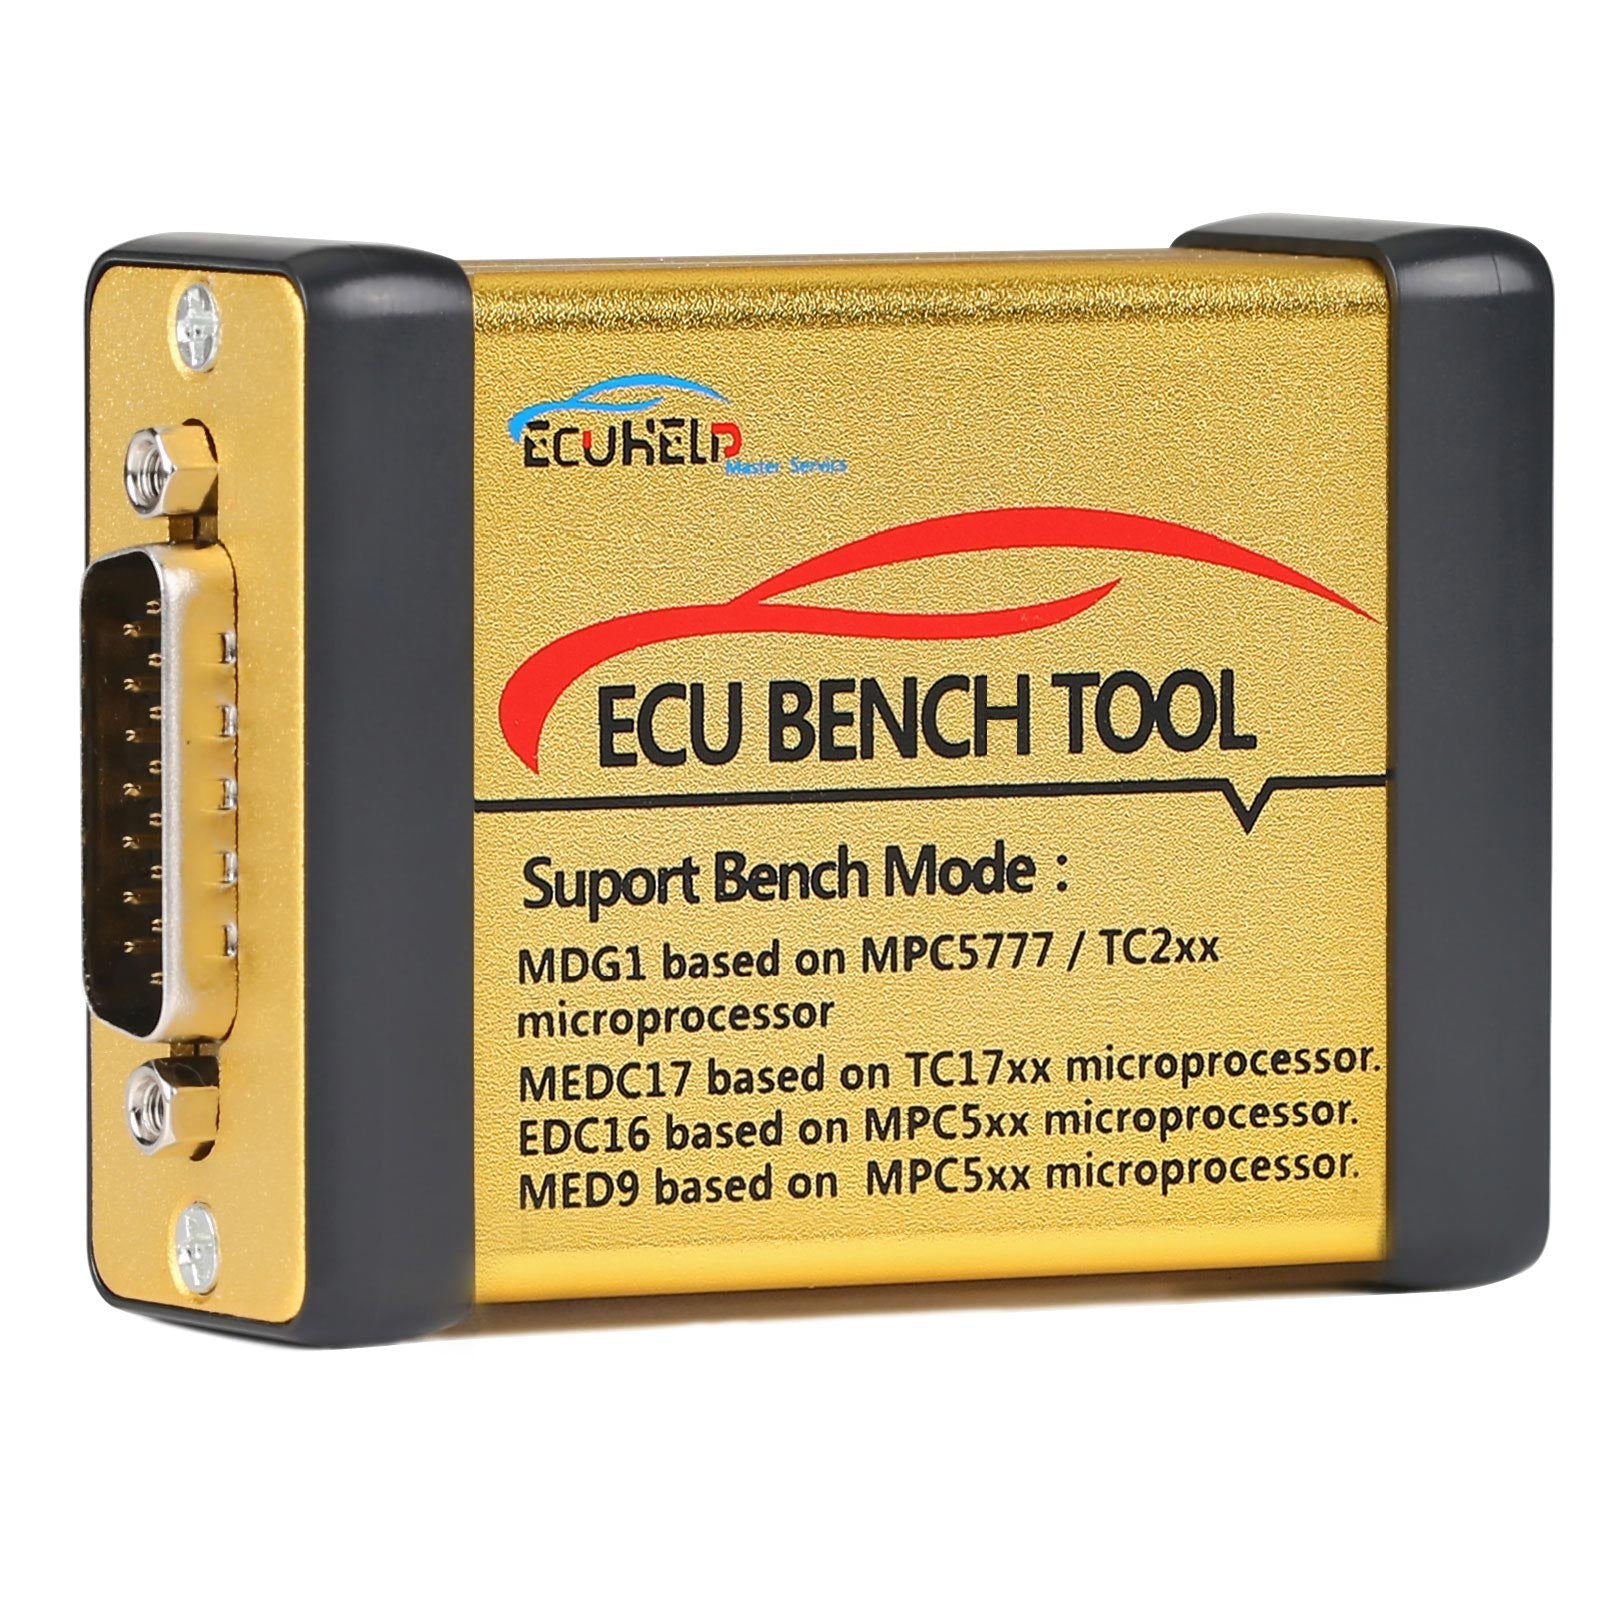 ECU Bench Tool Full Version with License Supports MD1 MG1 EDC16 MED9 ECU Free Update Online